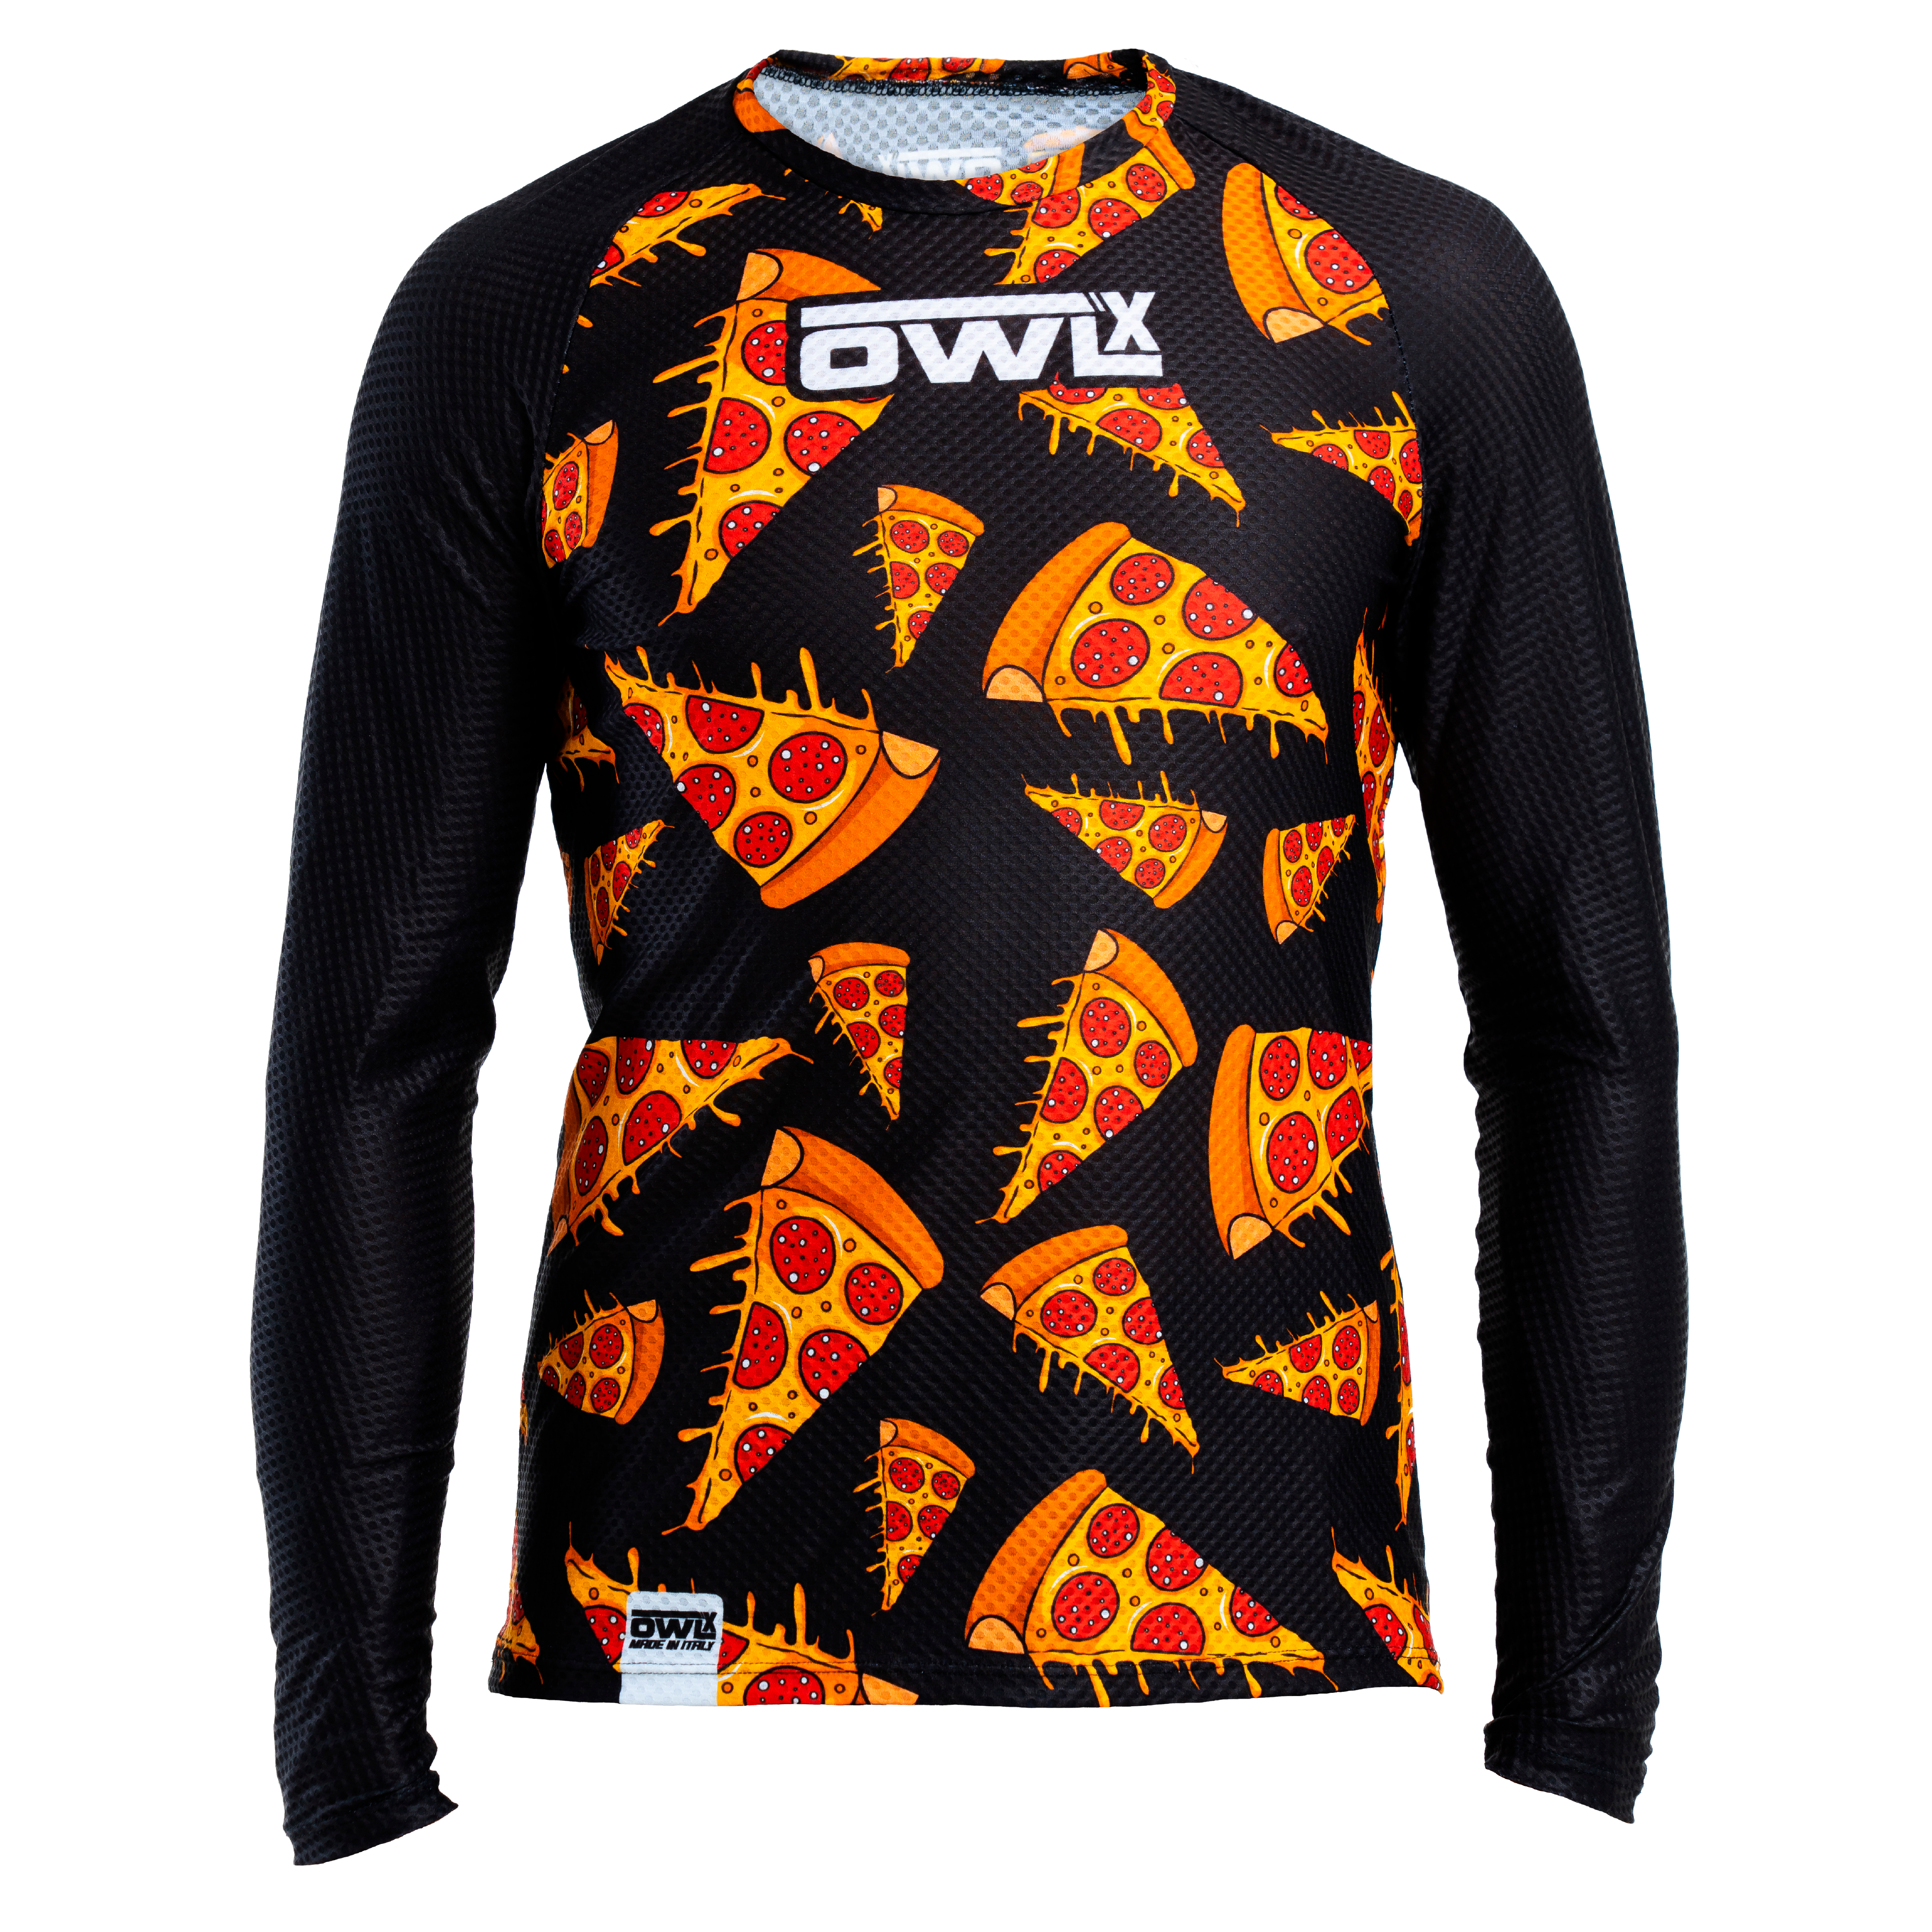 PIZZA JERSEY